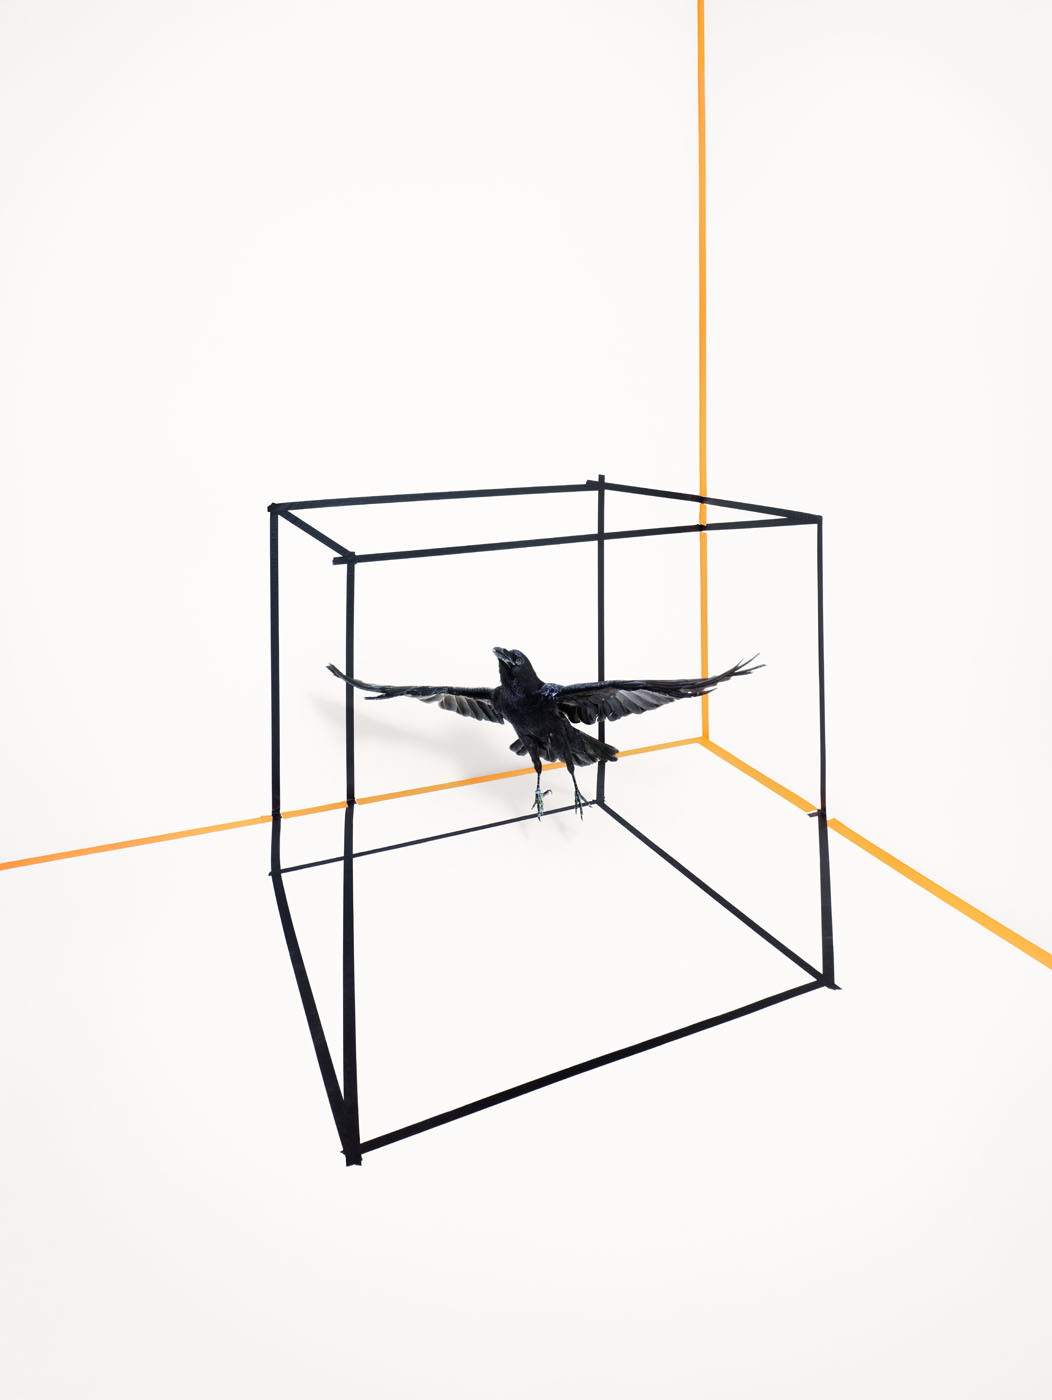 Photo illusion of flying raven in cube with masking tape by Alexander Kent.